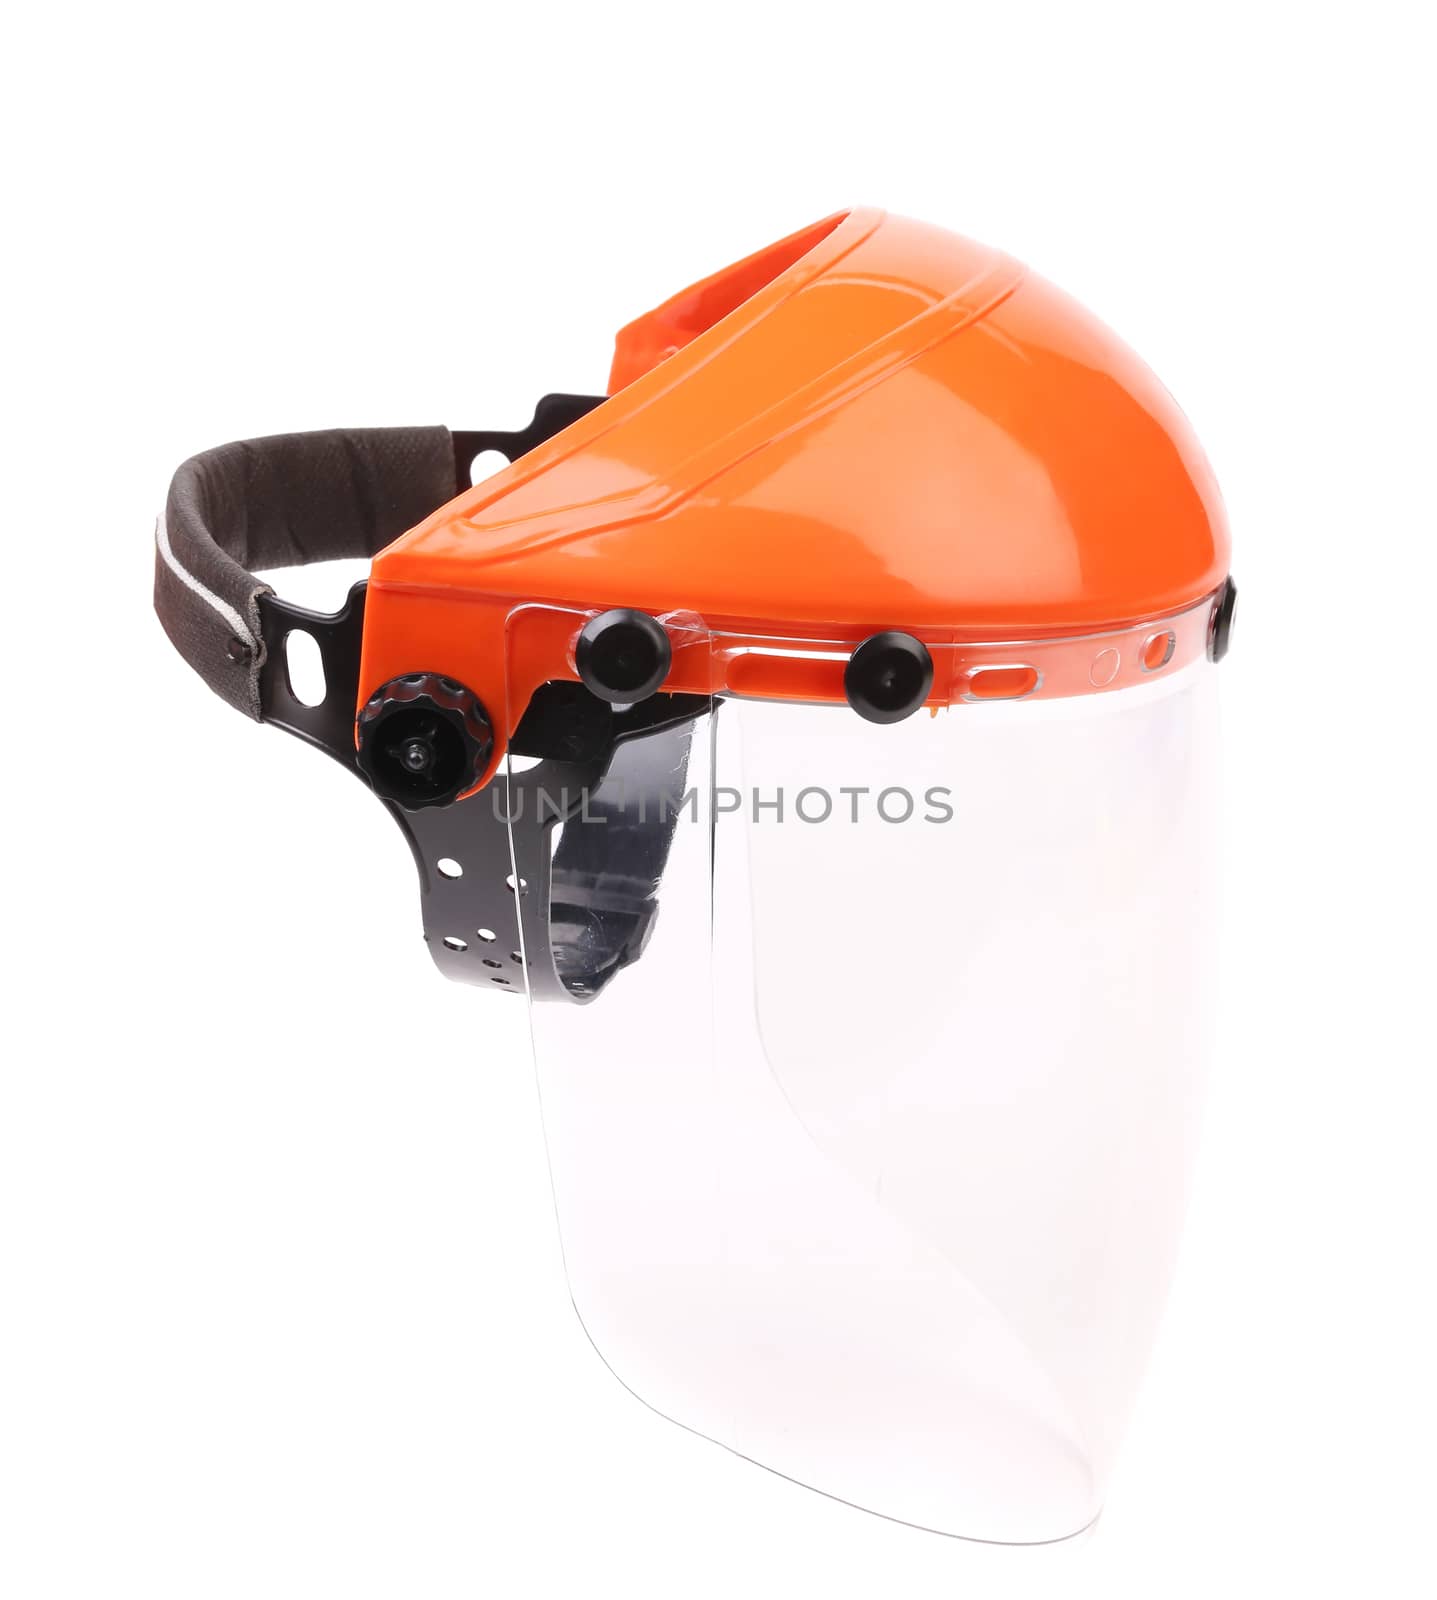 Protective face shield. Isolated on a white background.